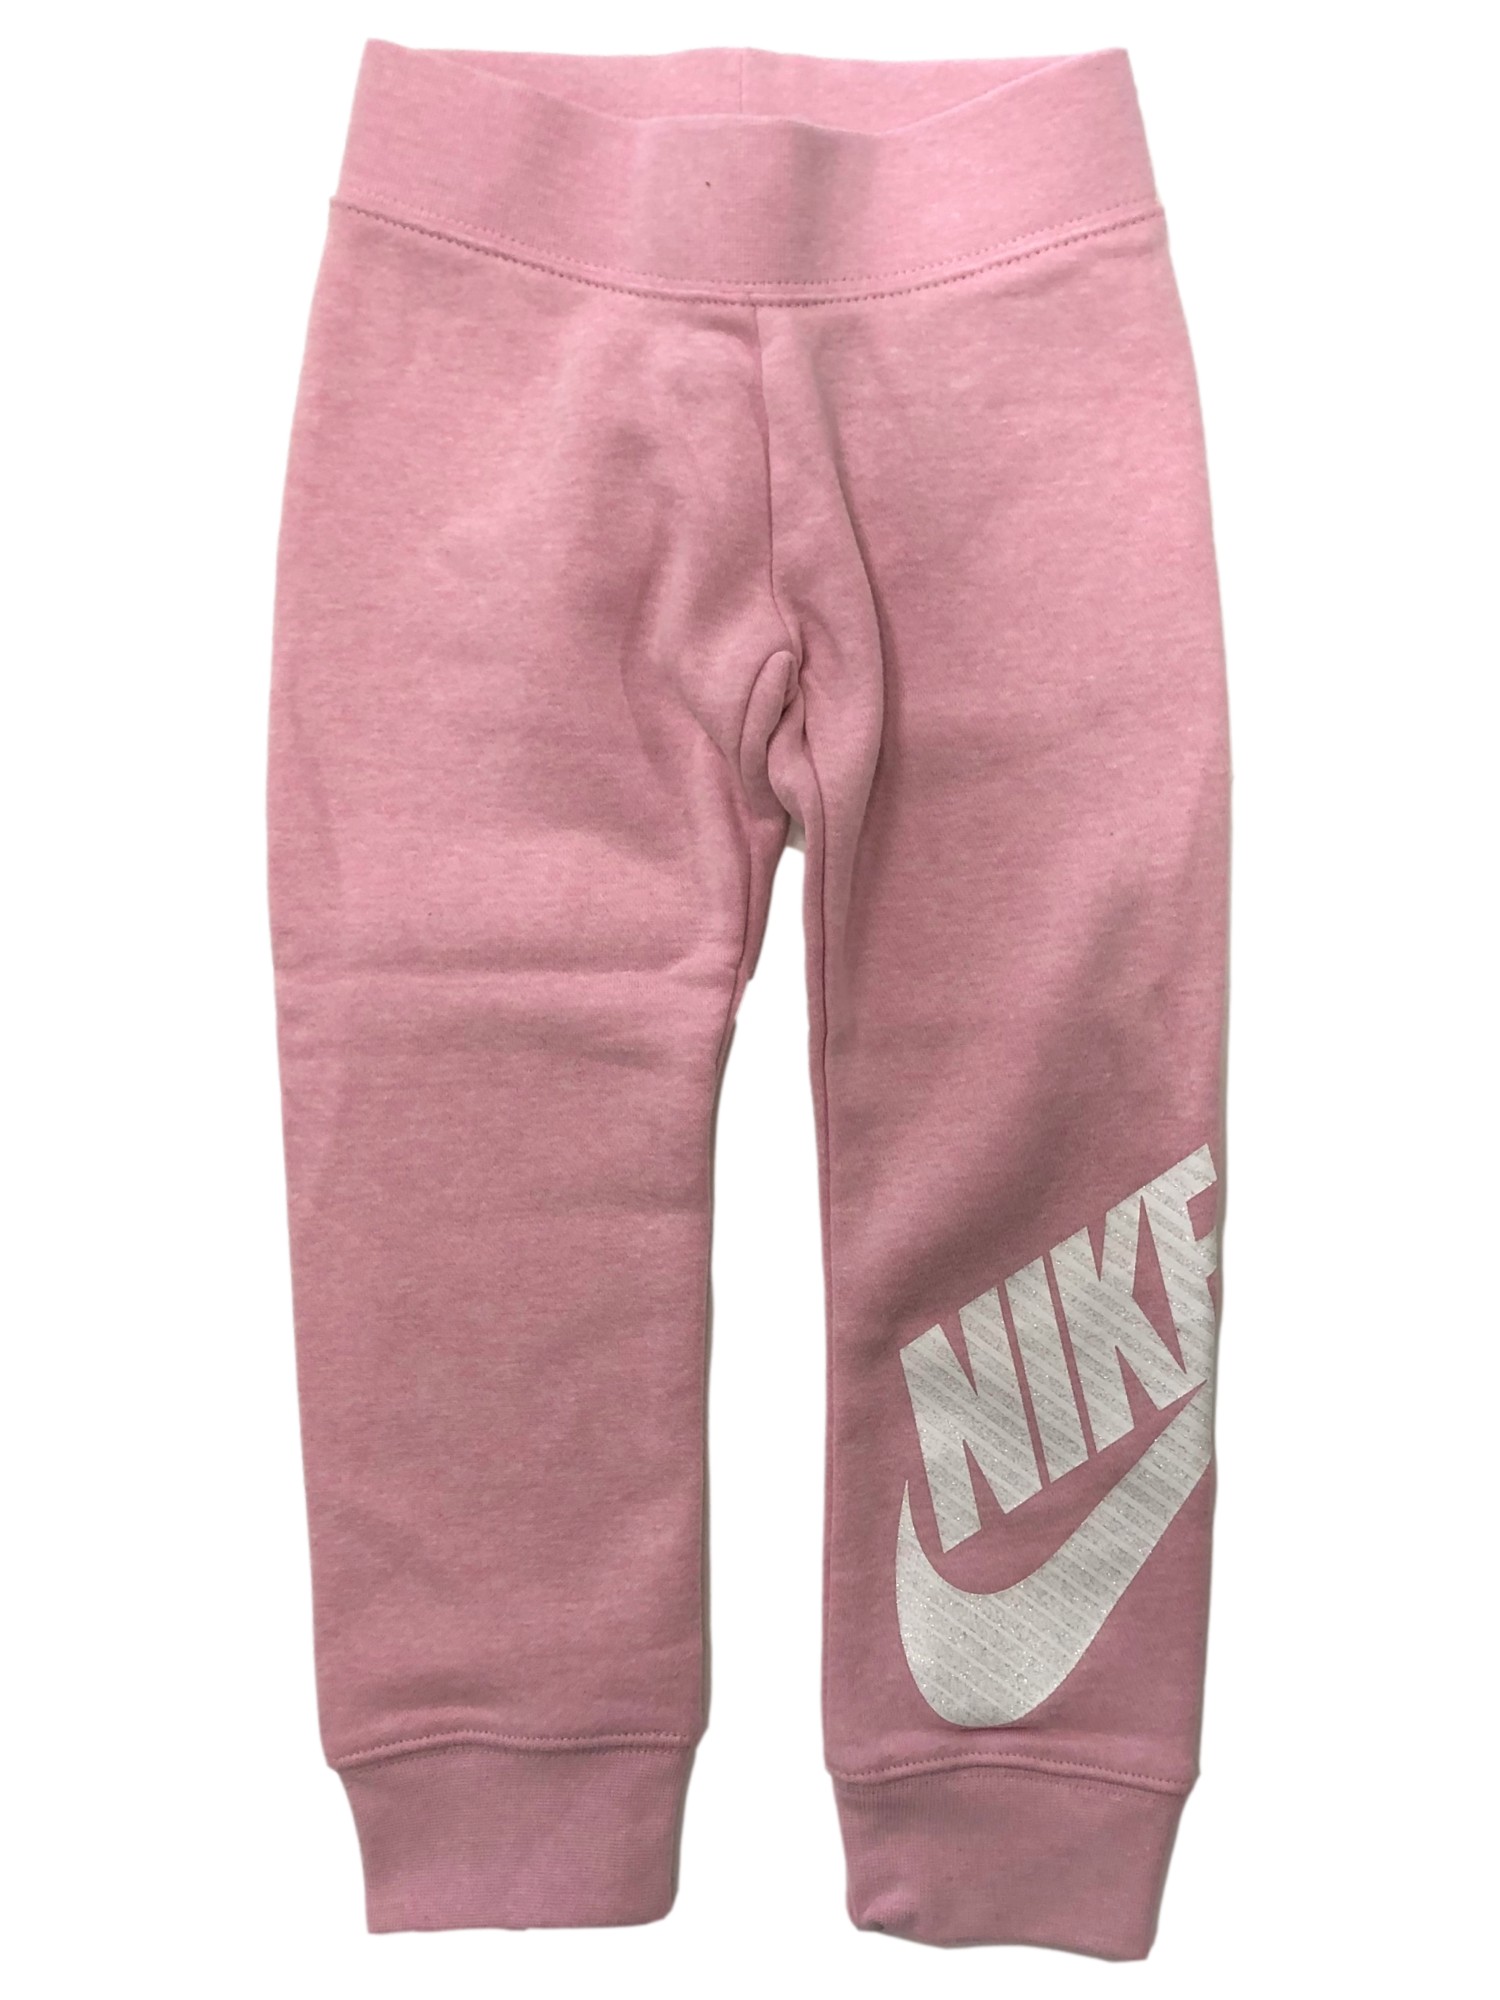 Nike Girls Pink Athletic Joggers Stretch Sweat Pants